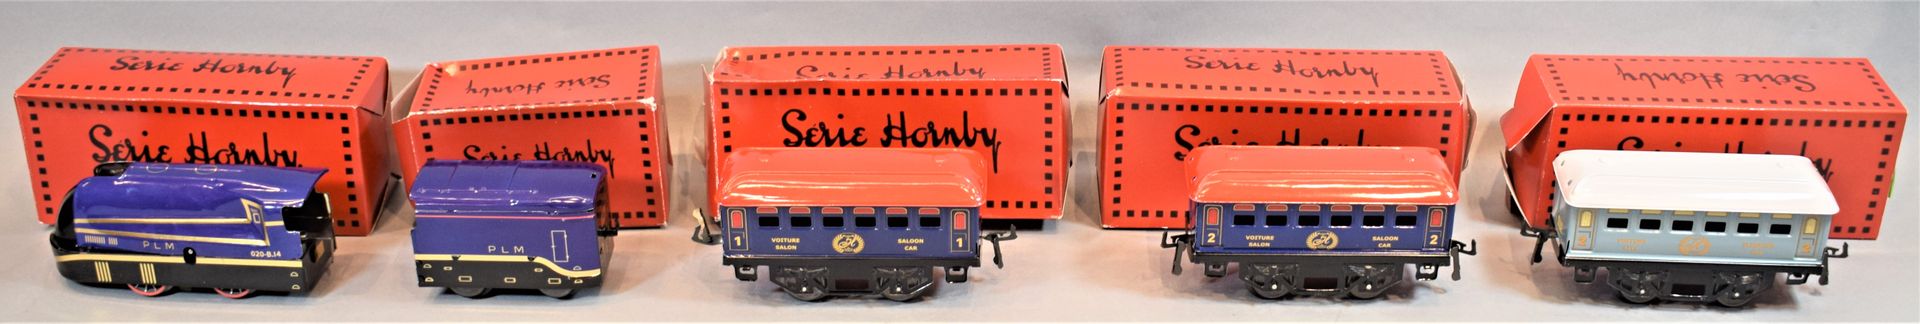 Null HACHETTE HORNBY Series 

Locomotive and passenger cars, scale "O":



- P.L&hellip;